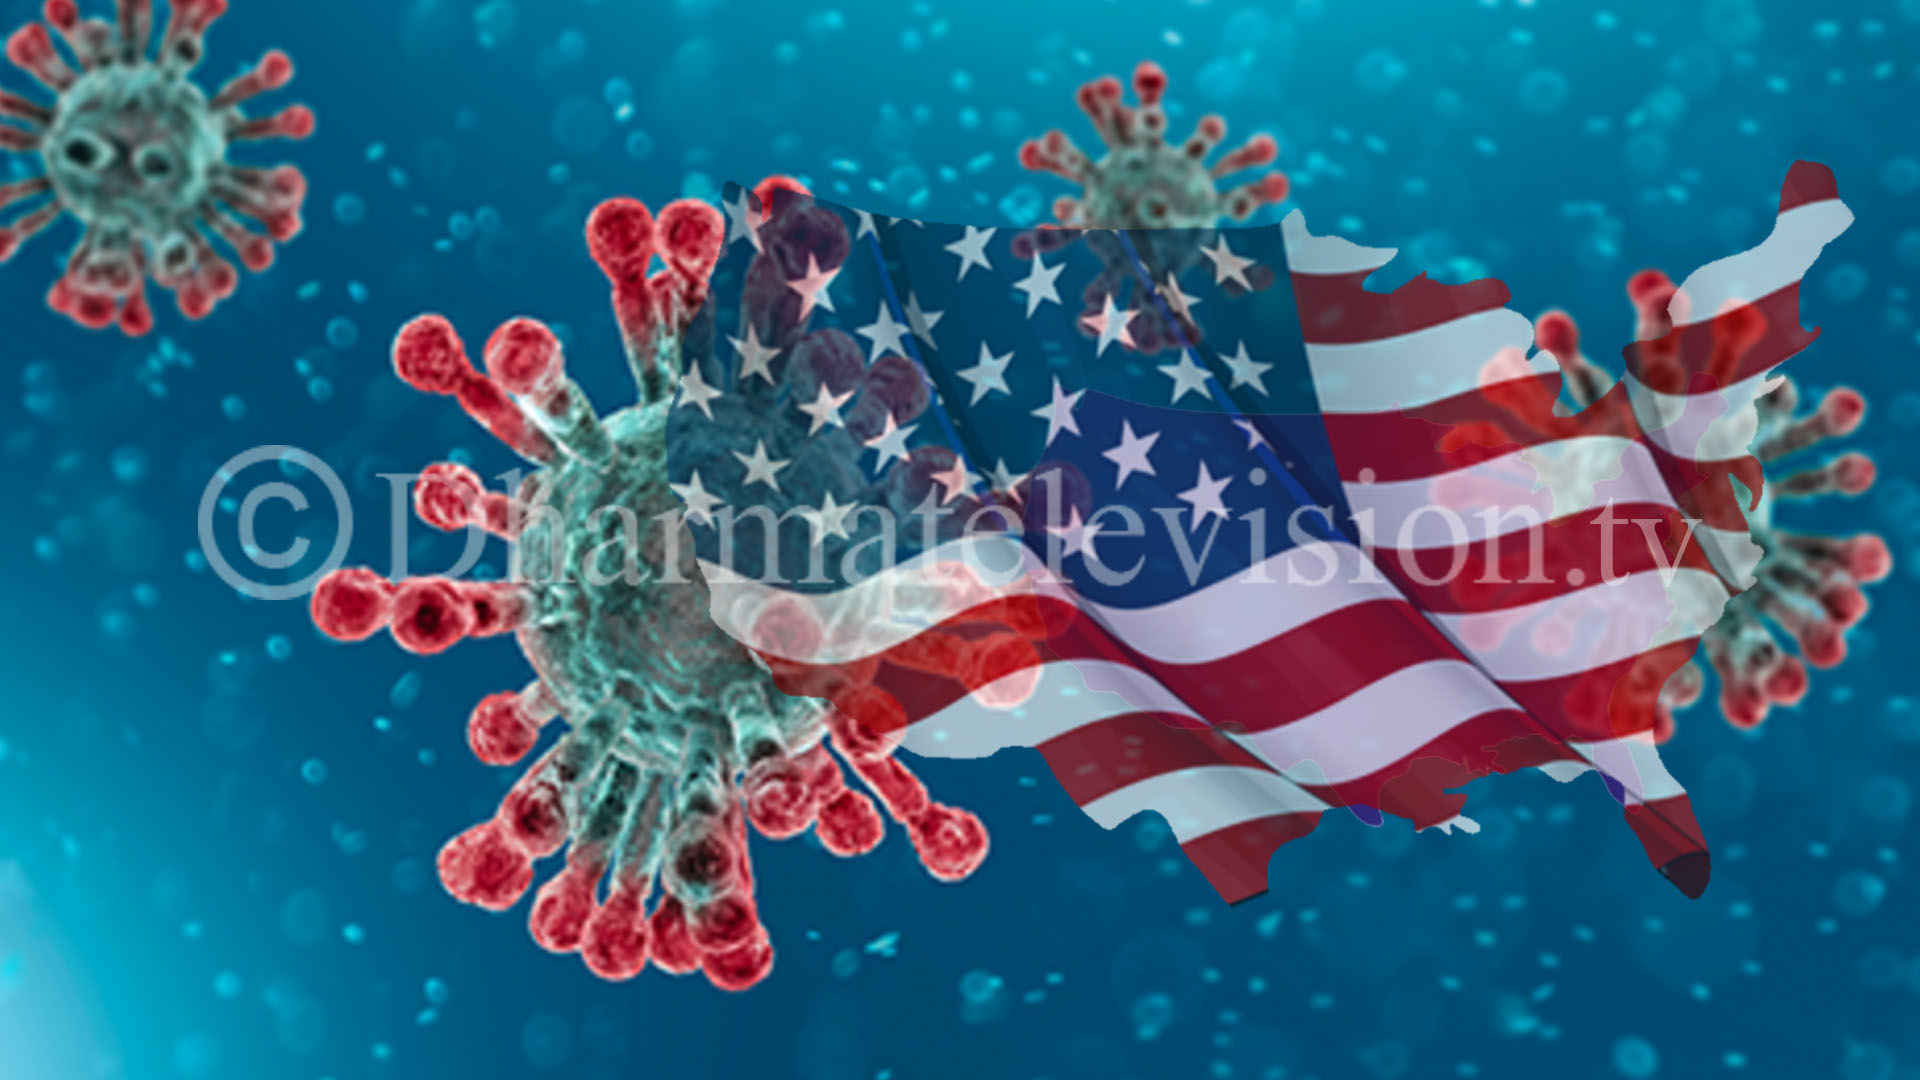 More than 20 million infections in the United States